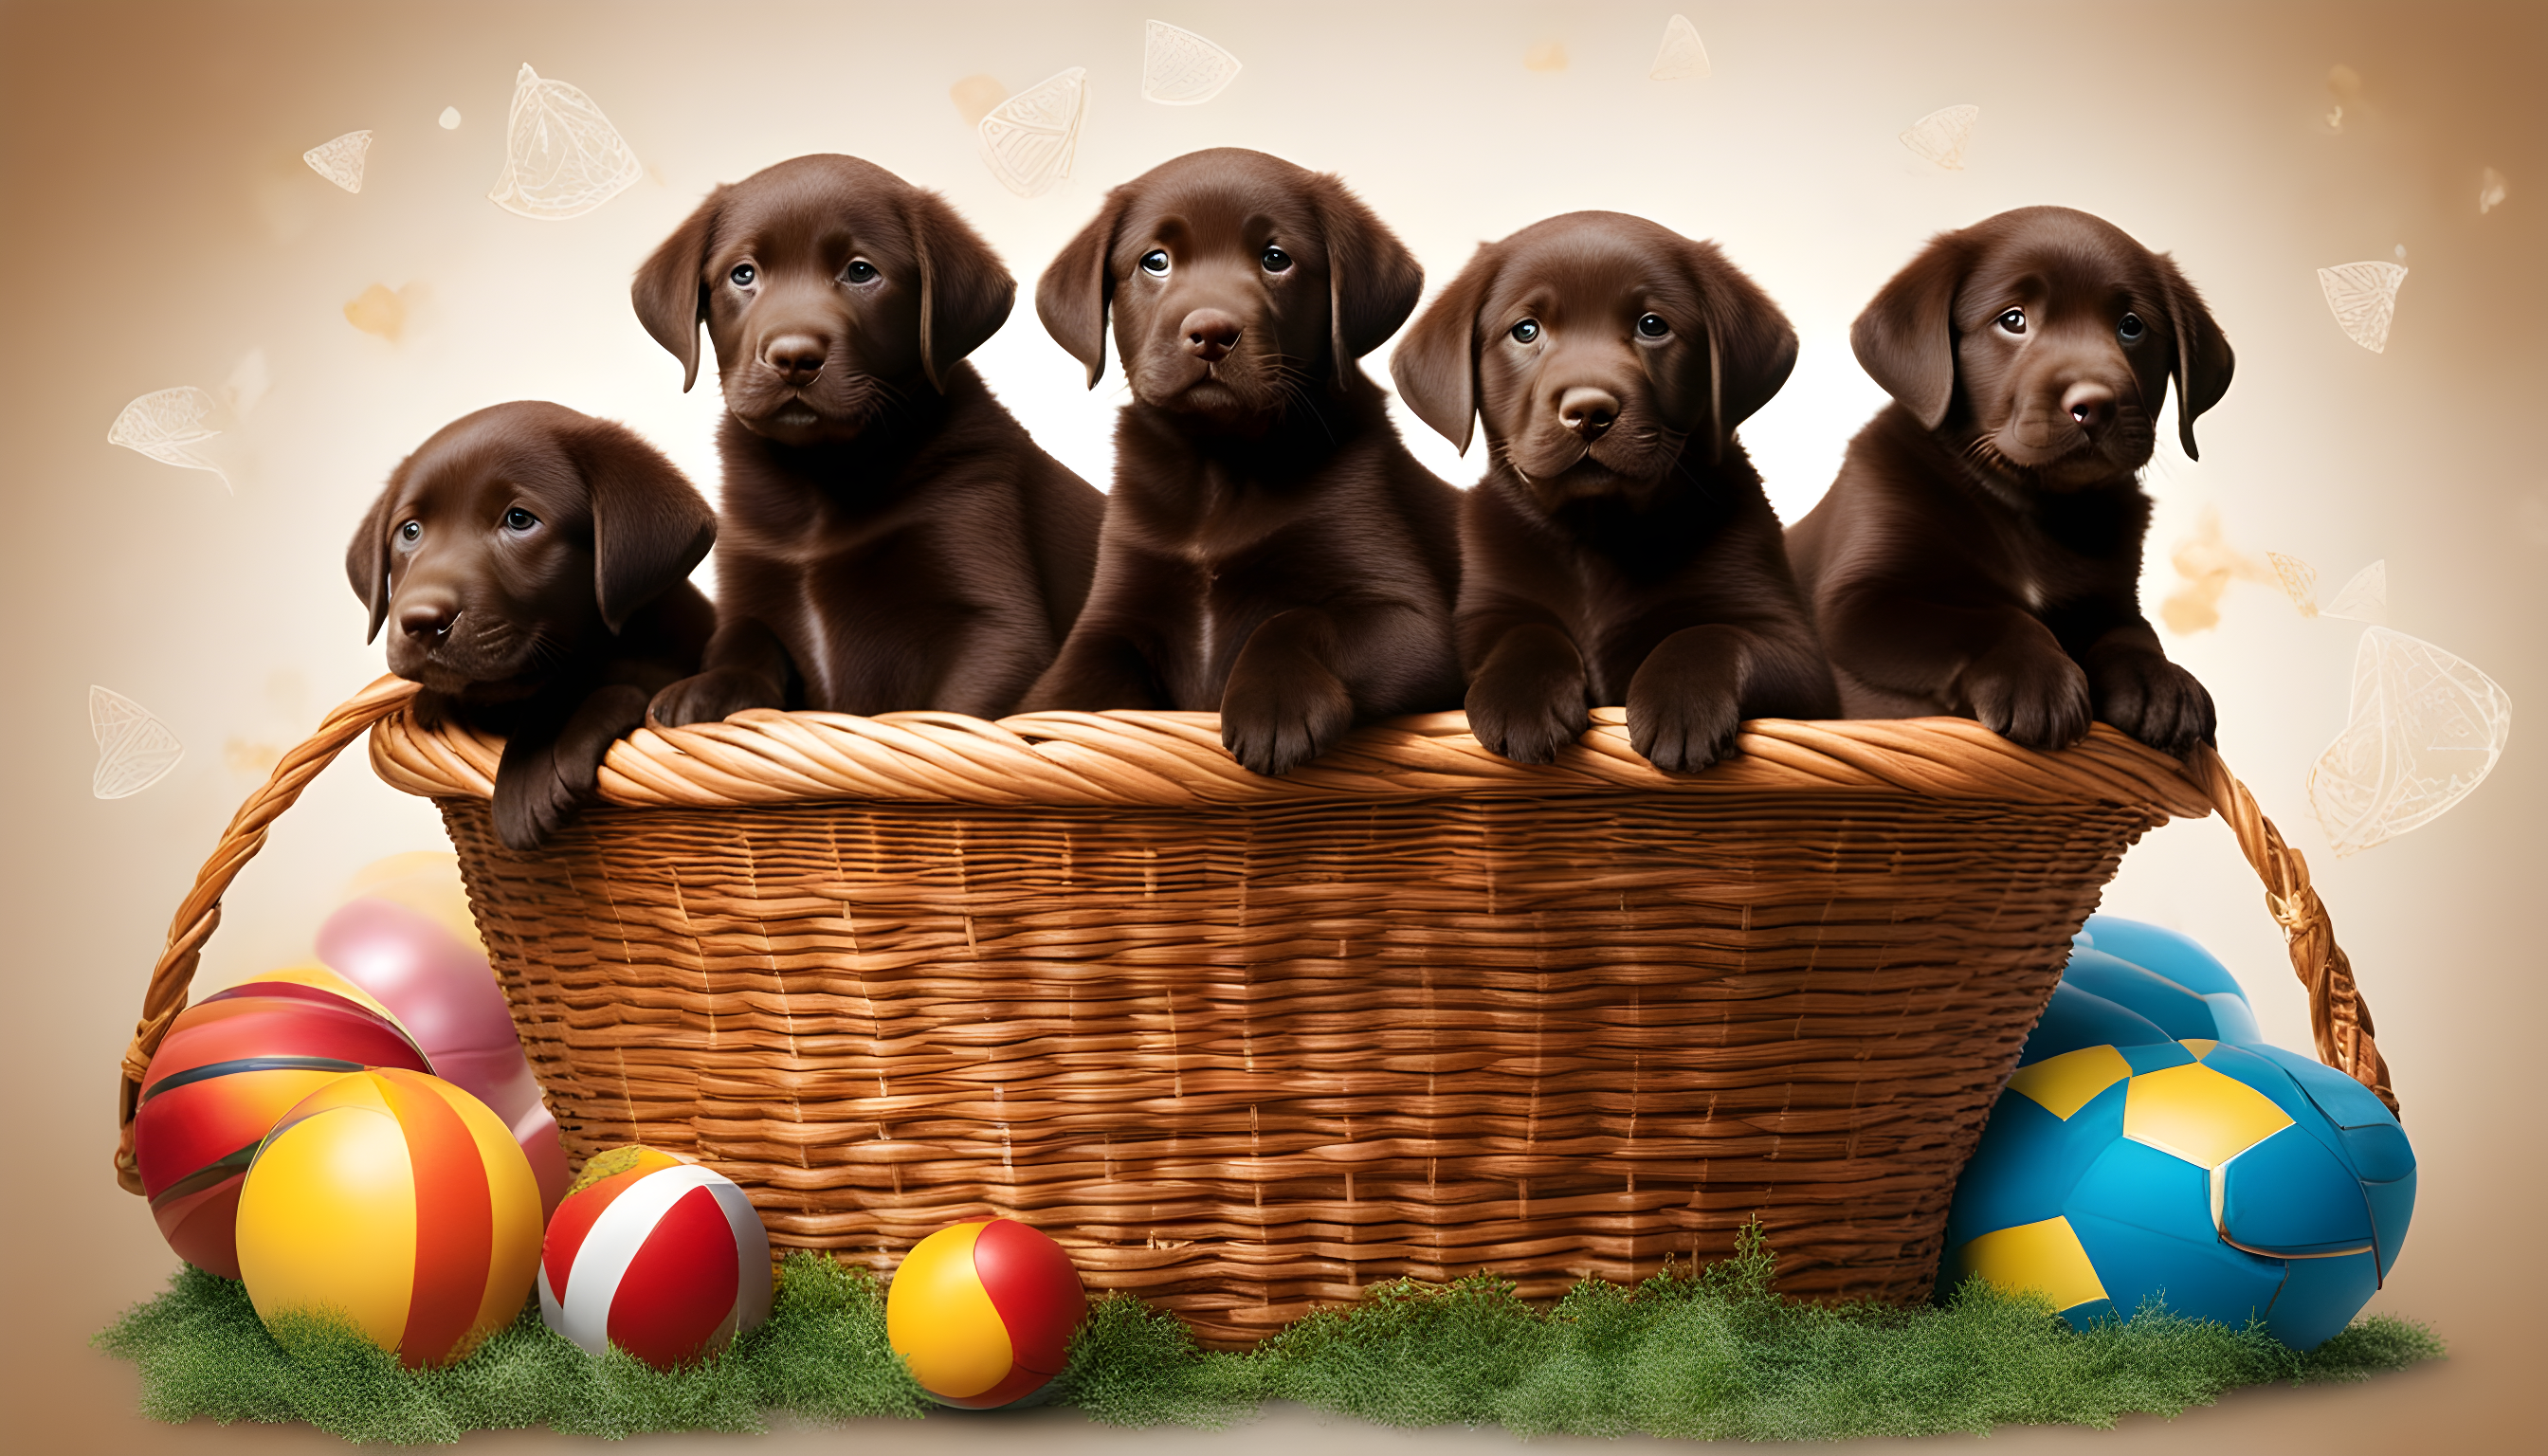 A basket full of English Chocolate Lab puppies with a DNA double helix graphic floating in the background